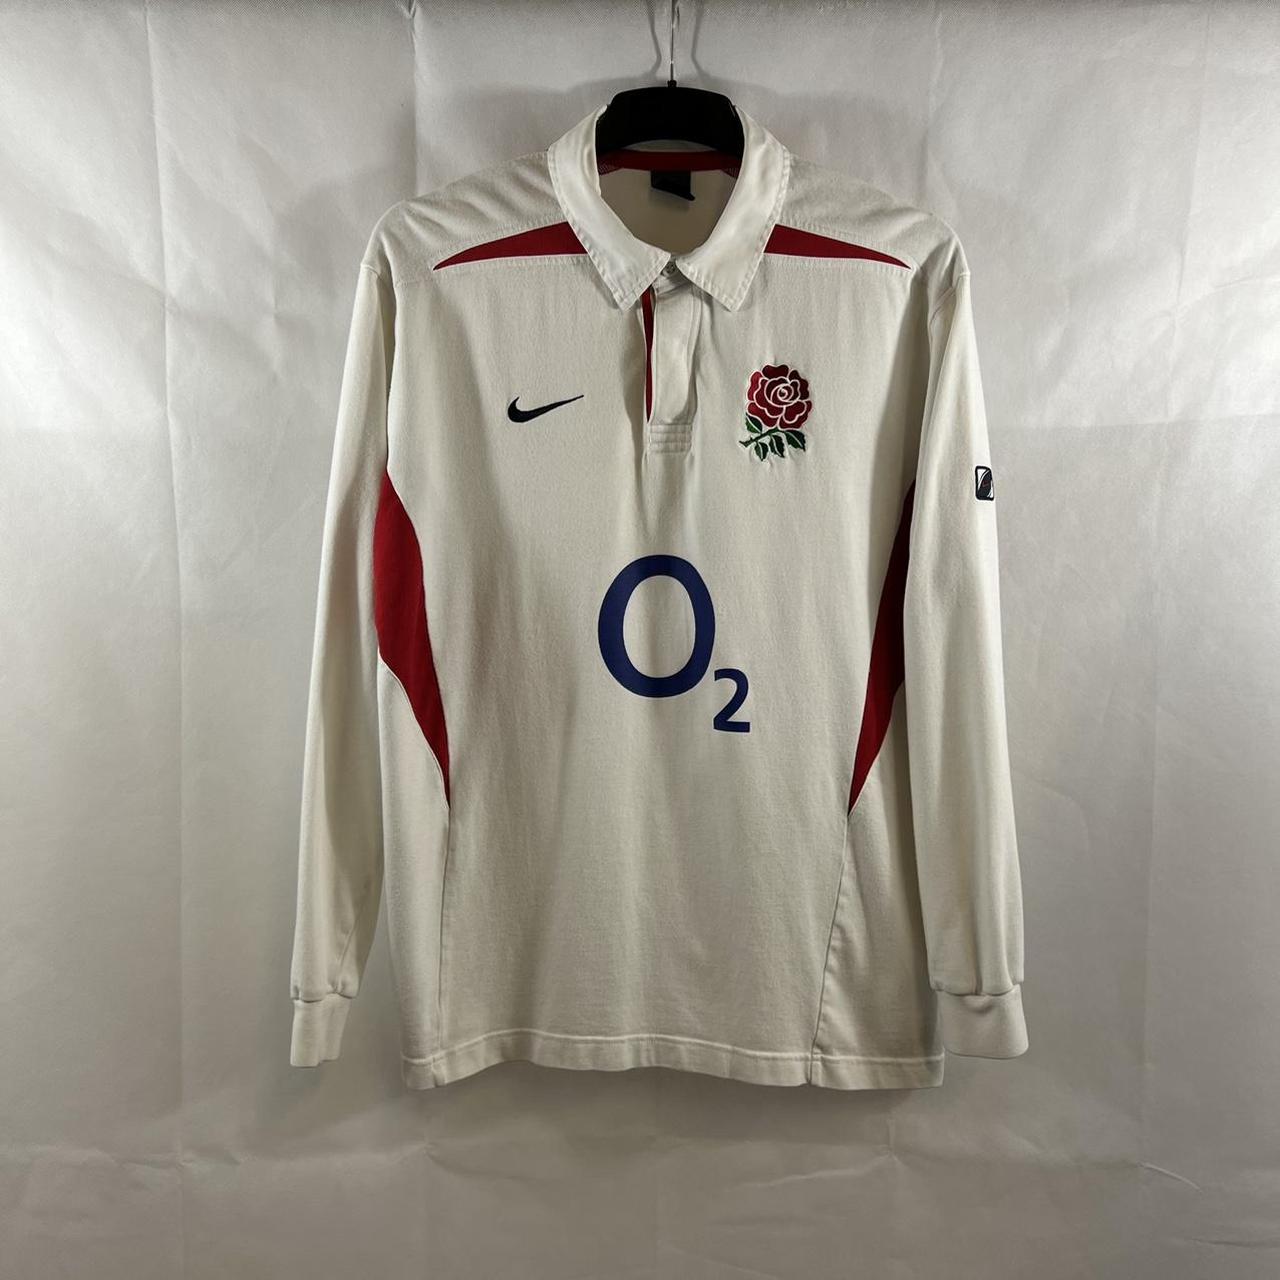 England L/S Home Rugby Shirt 2003/05 Adults XL Nike... - Depop